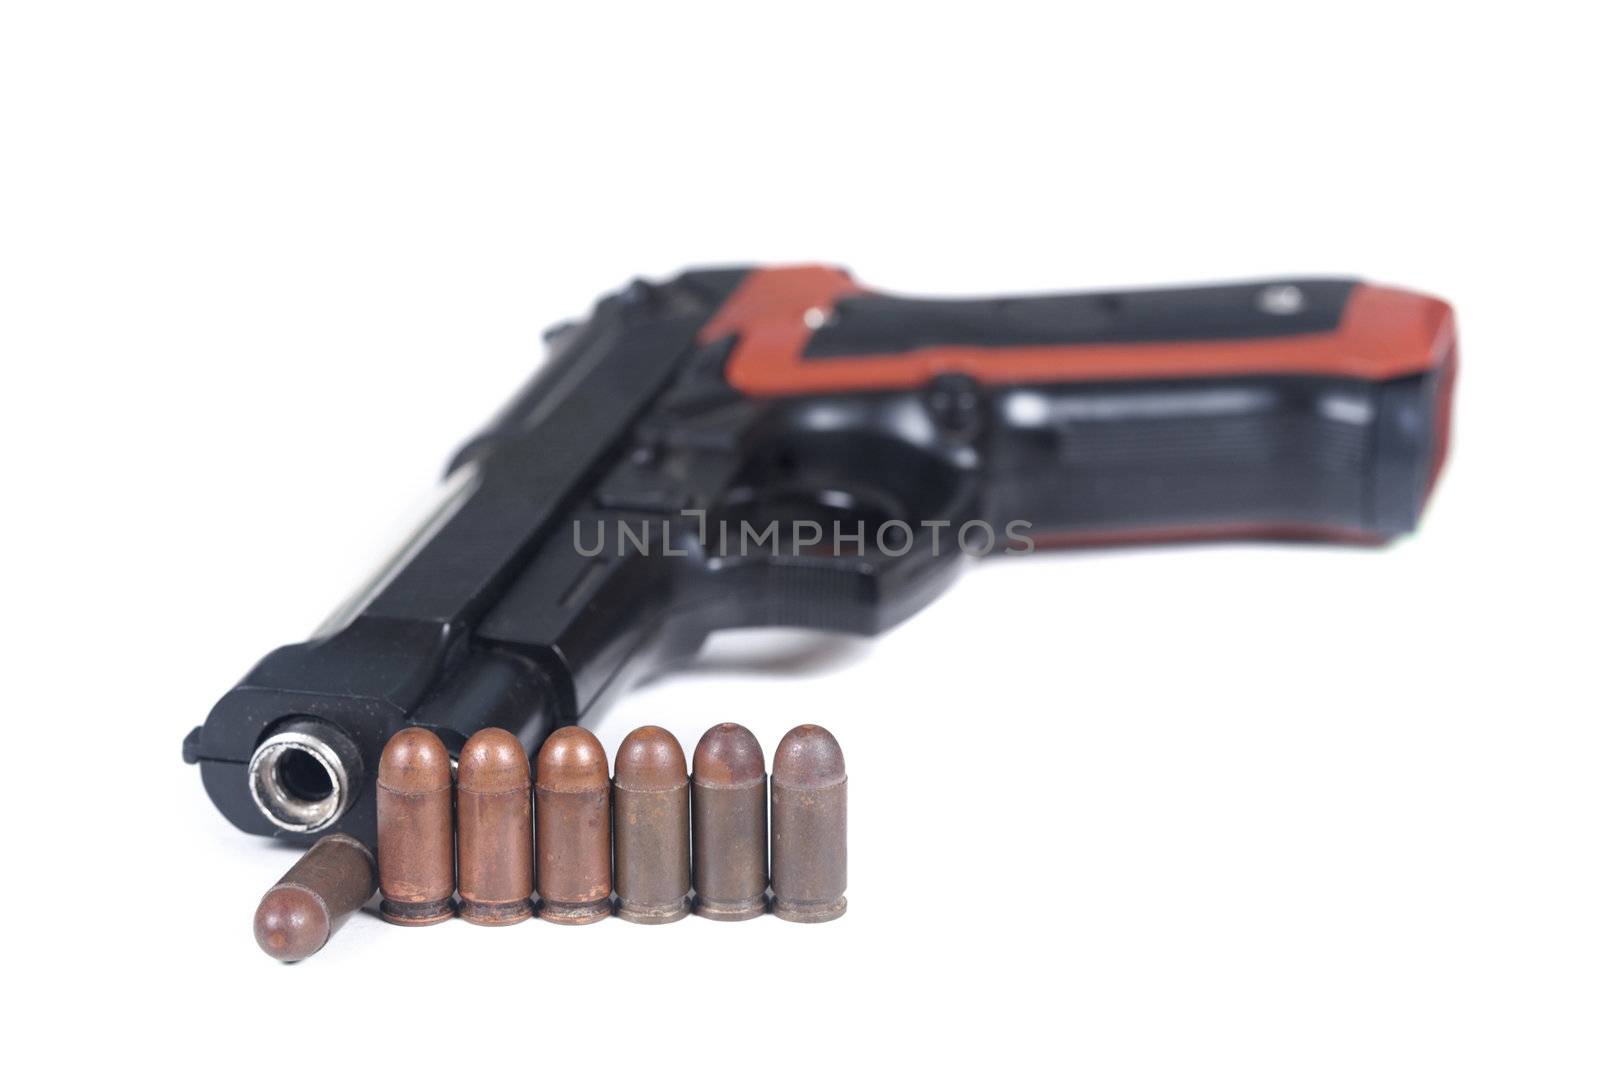 Pistol and ammunition on a white background